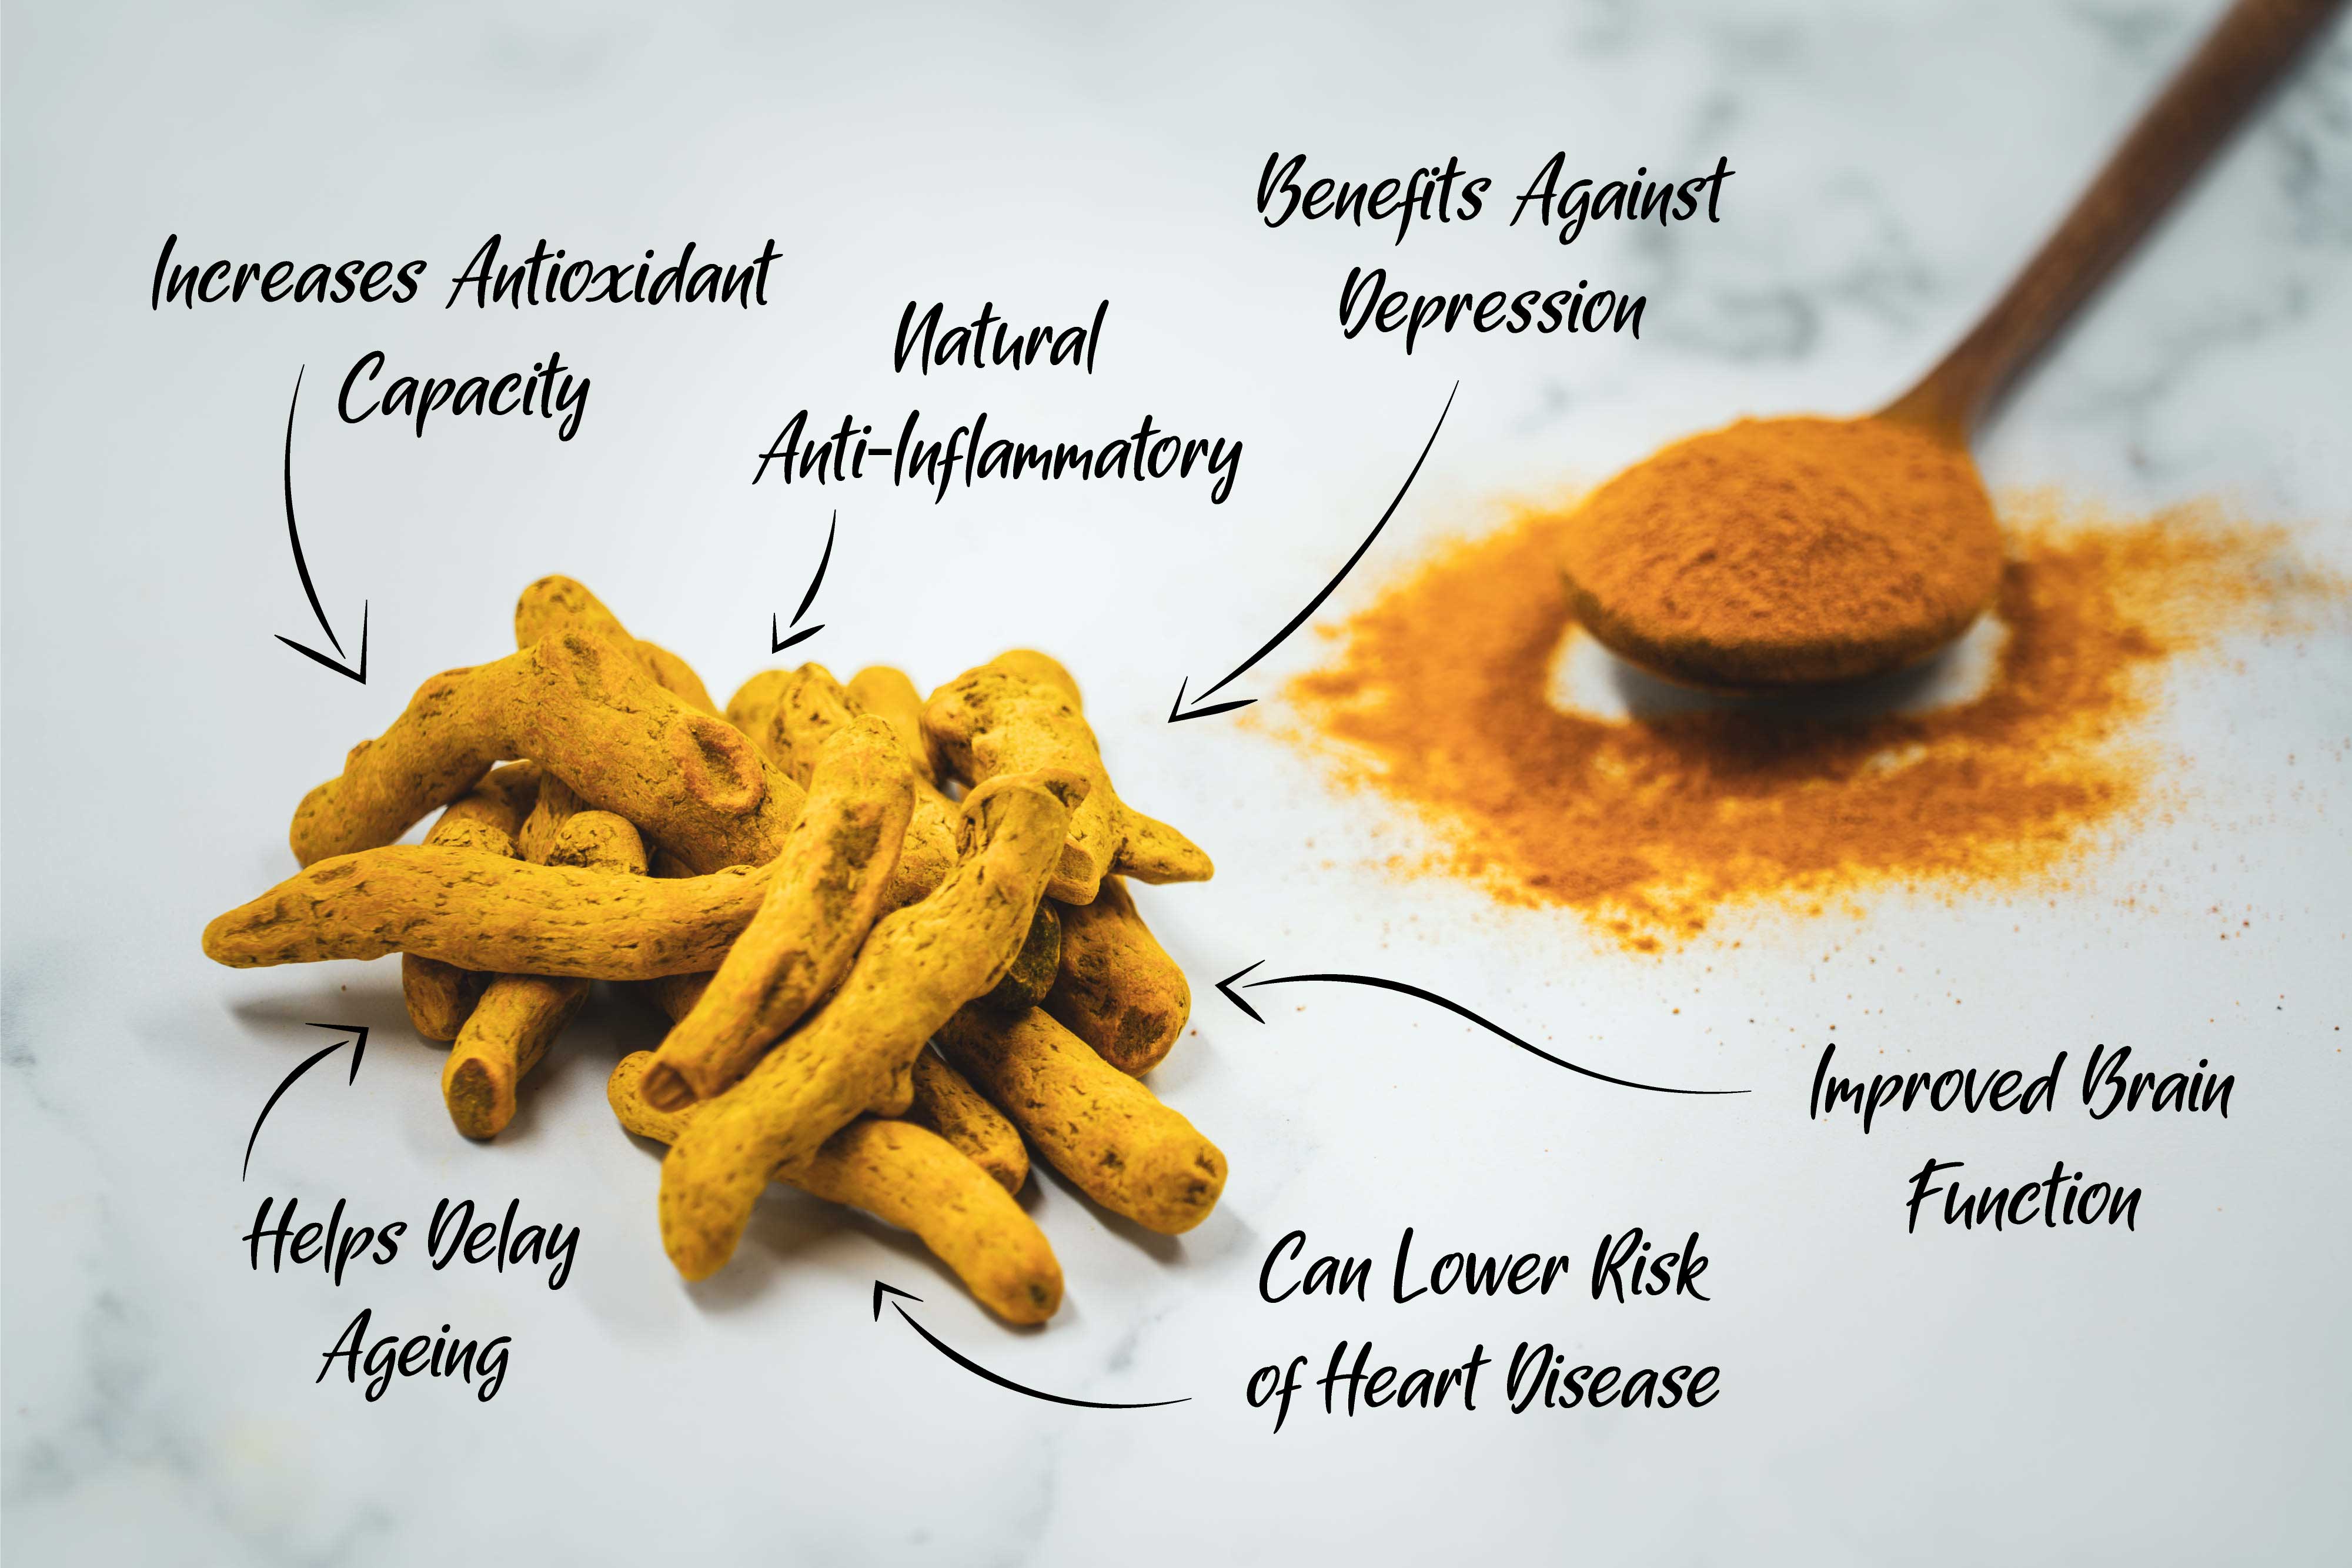 How to Incorporate Curcumin into Your Daily Routine